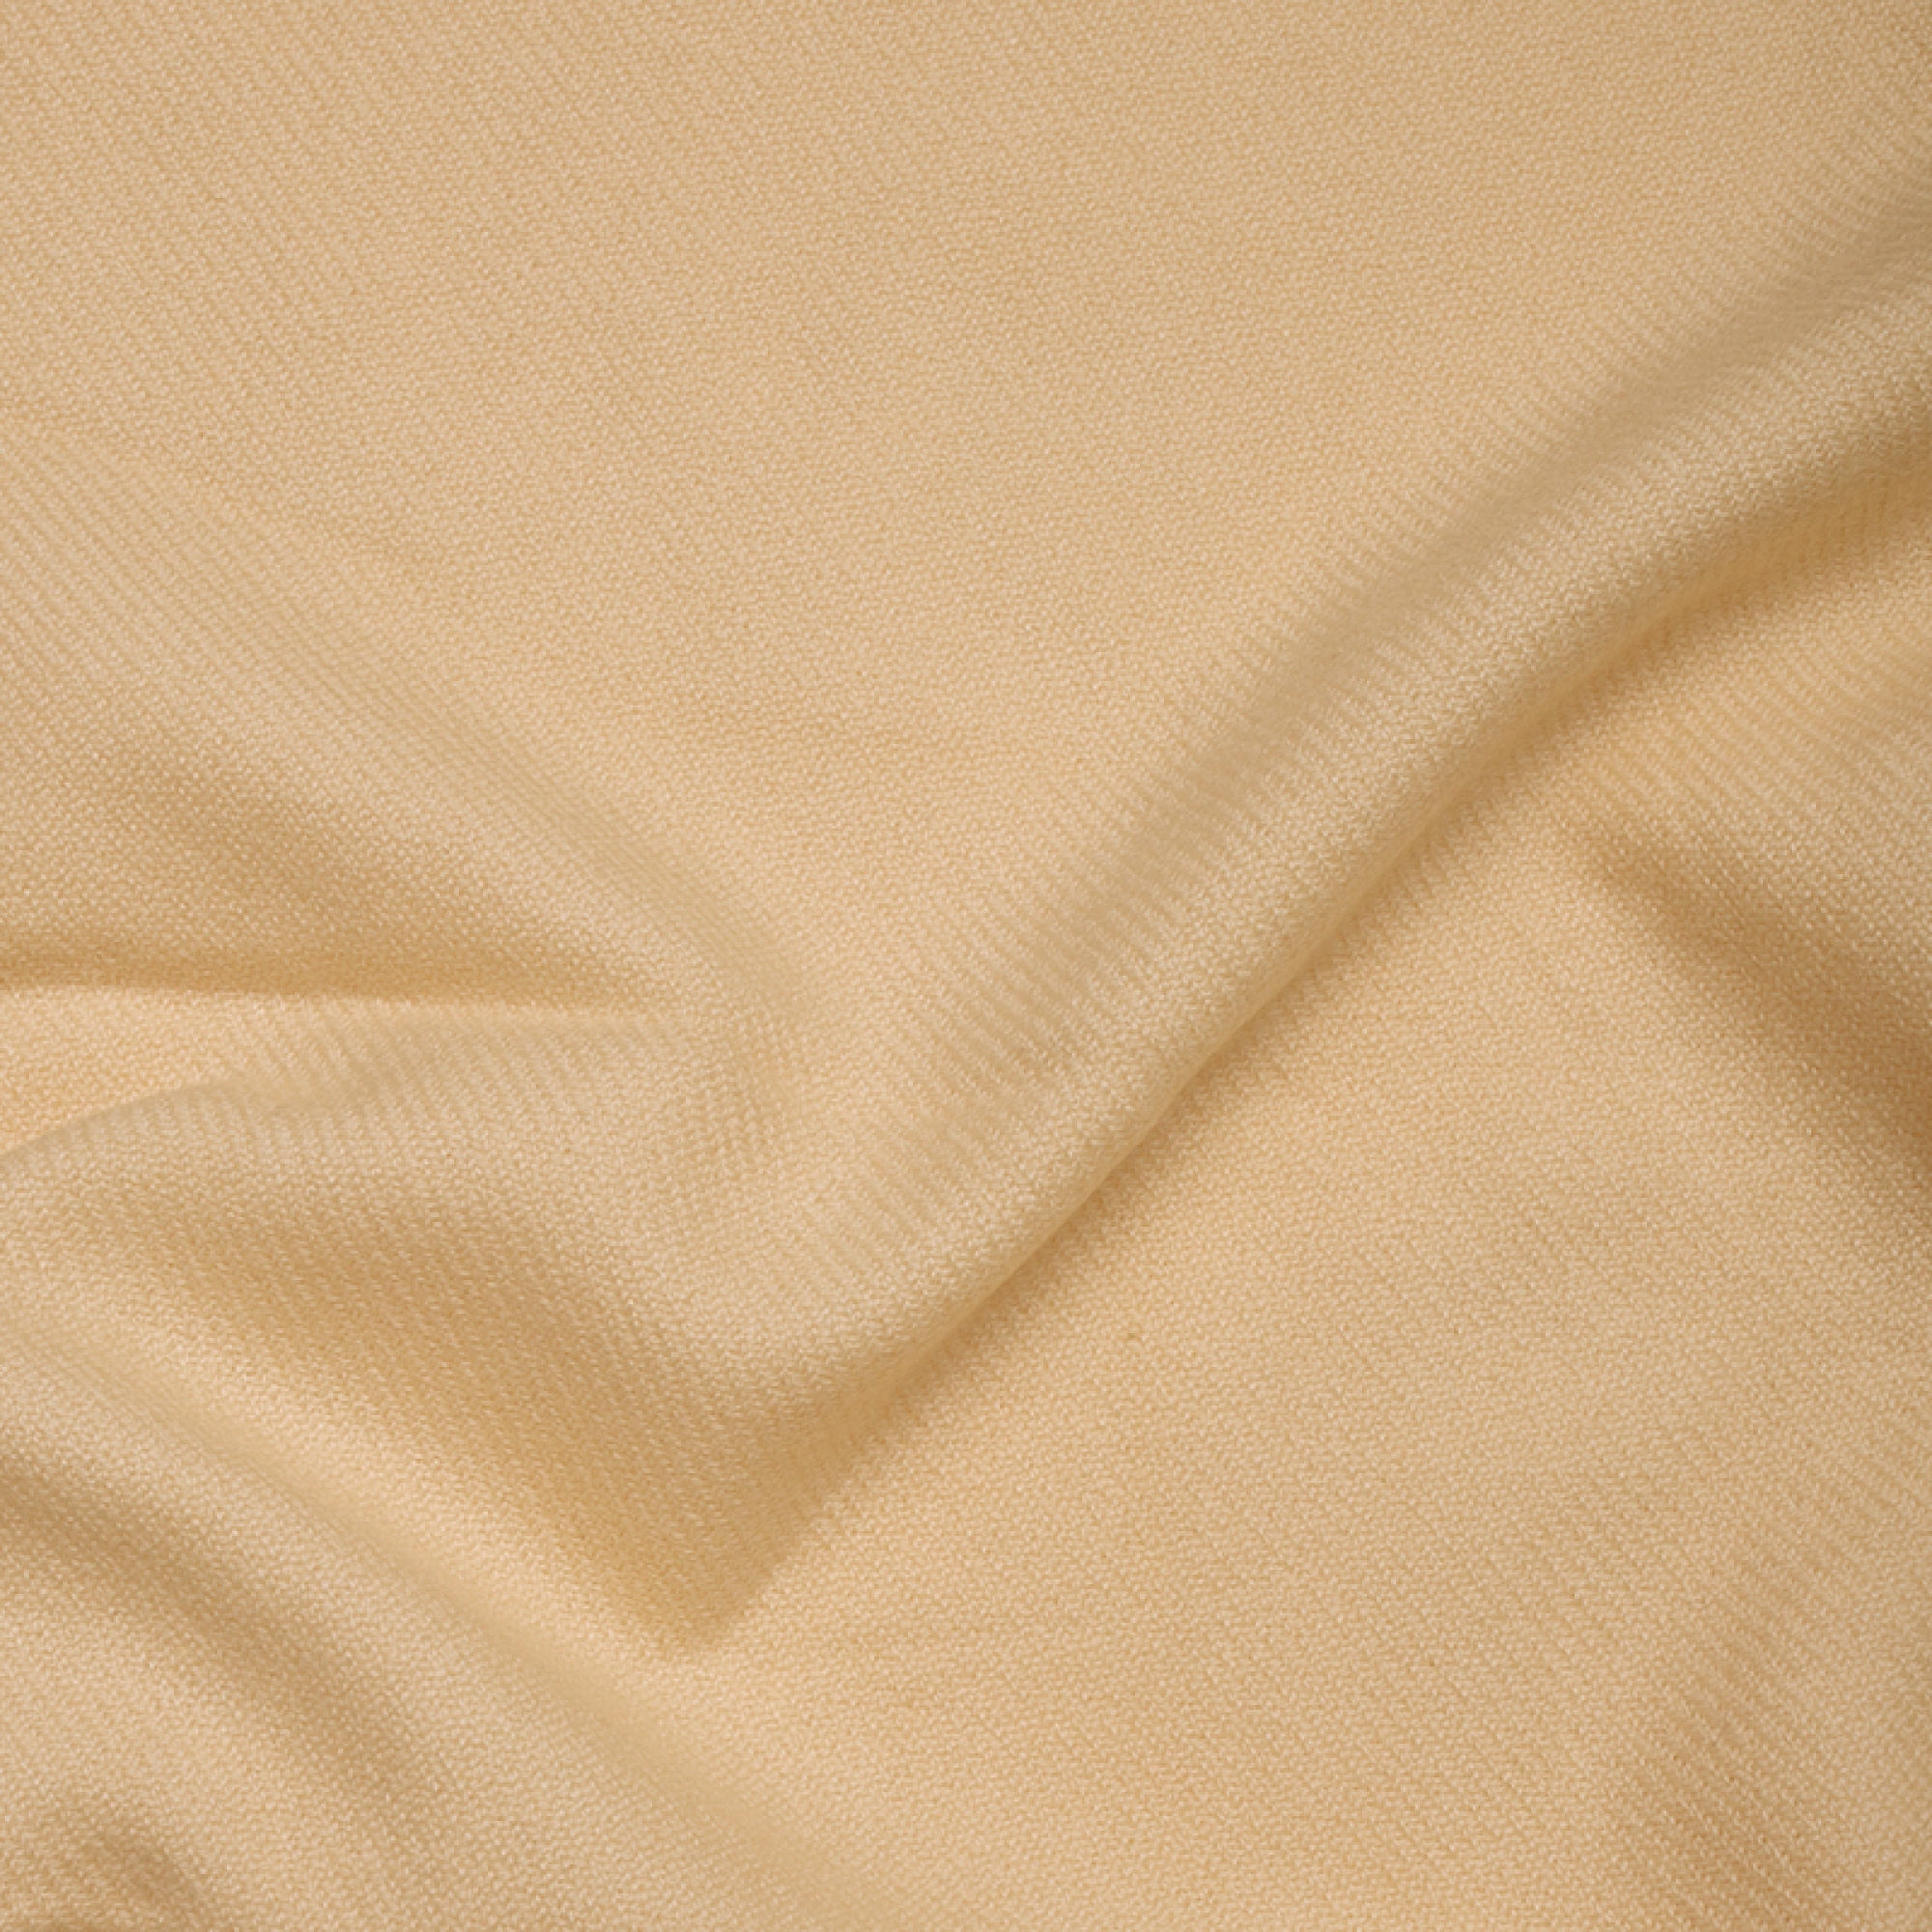 Cashmere accessories cocooning toodoo plain l 220 x 220 champagne 220x220cm